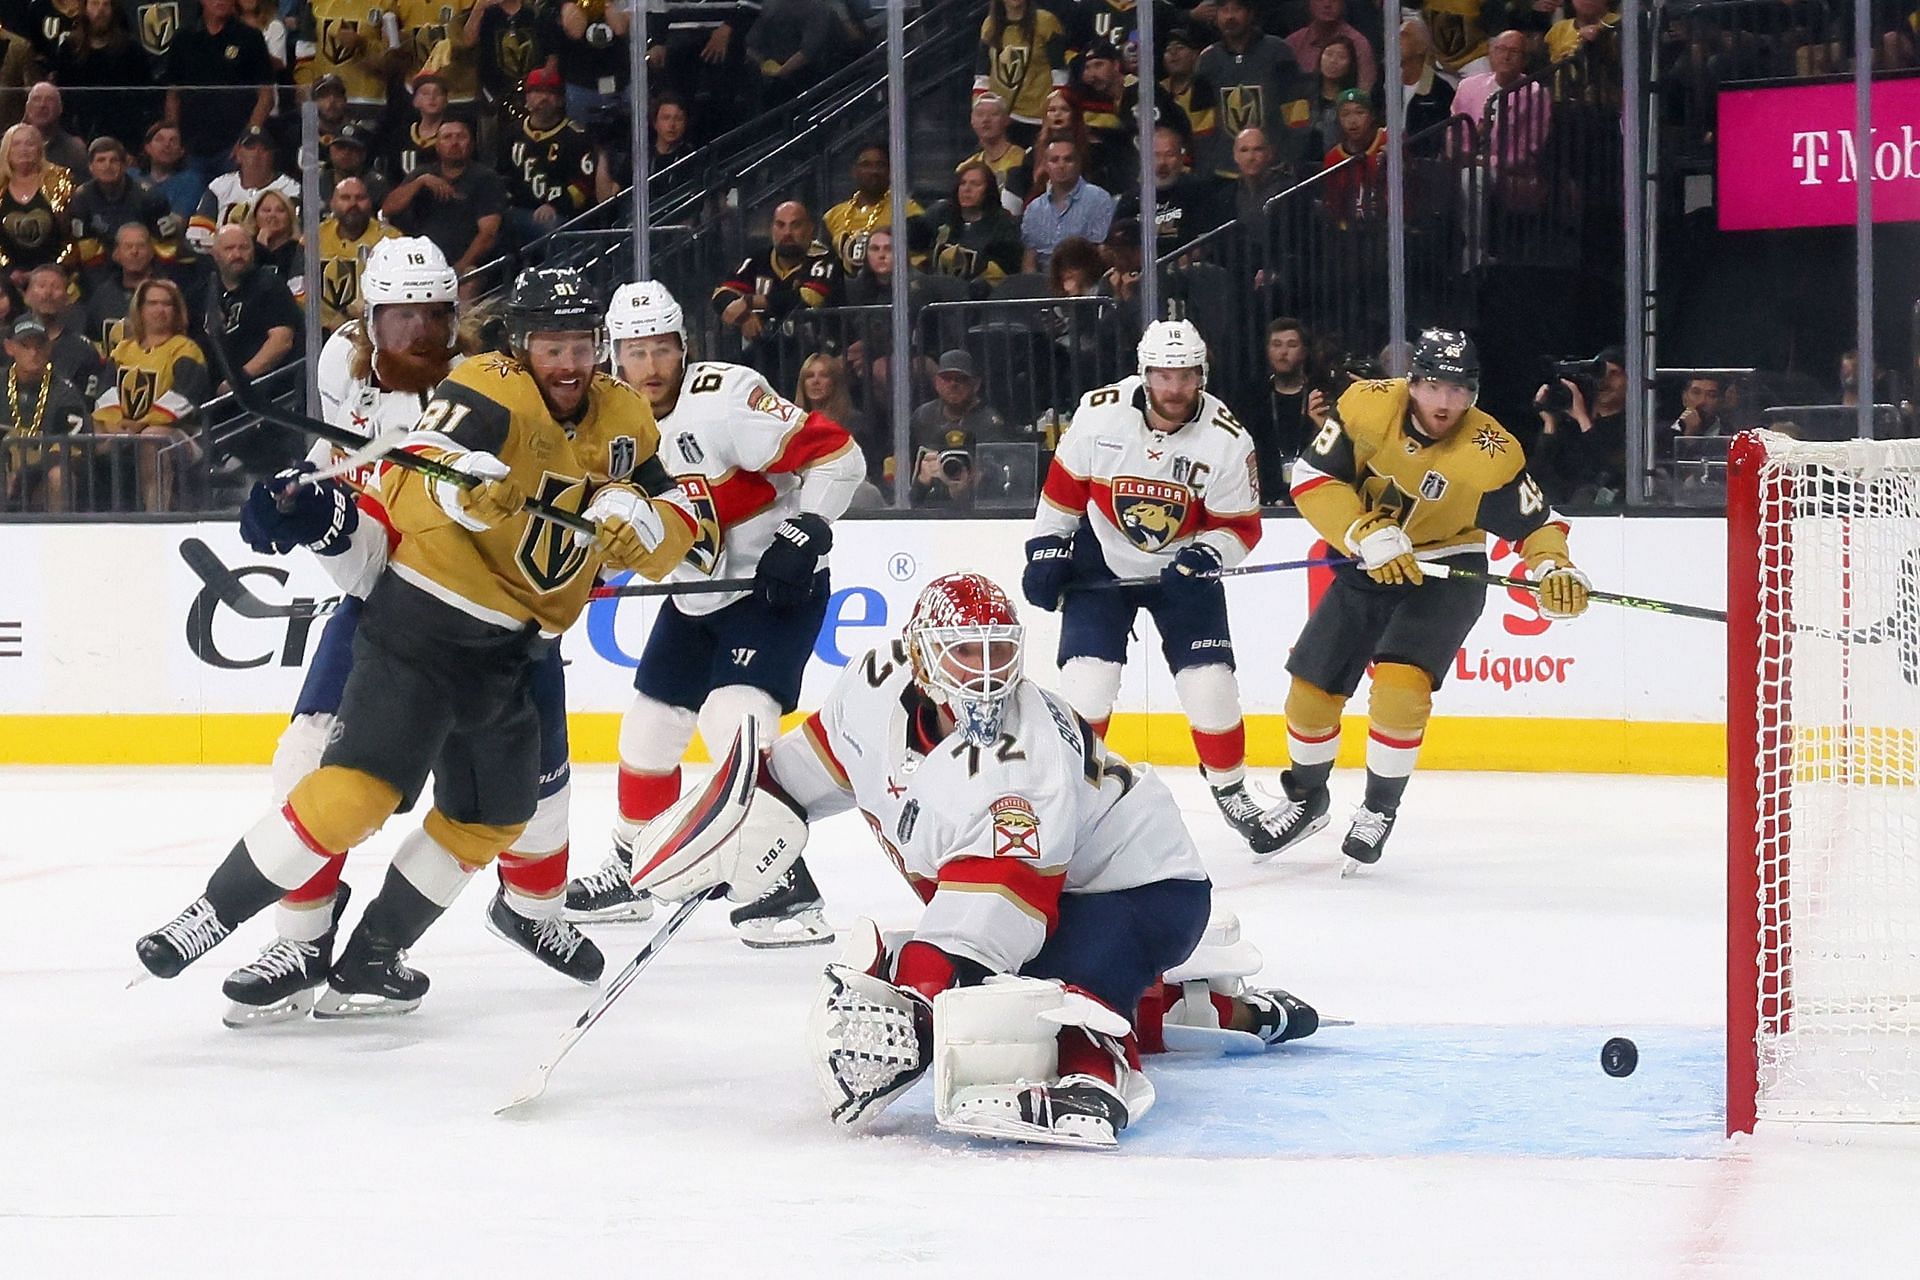 Panthers rally, close gap in Stanley Cup Final